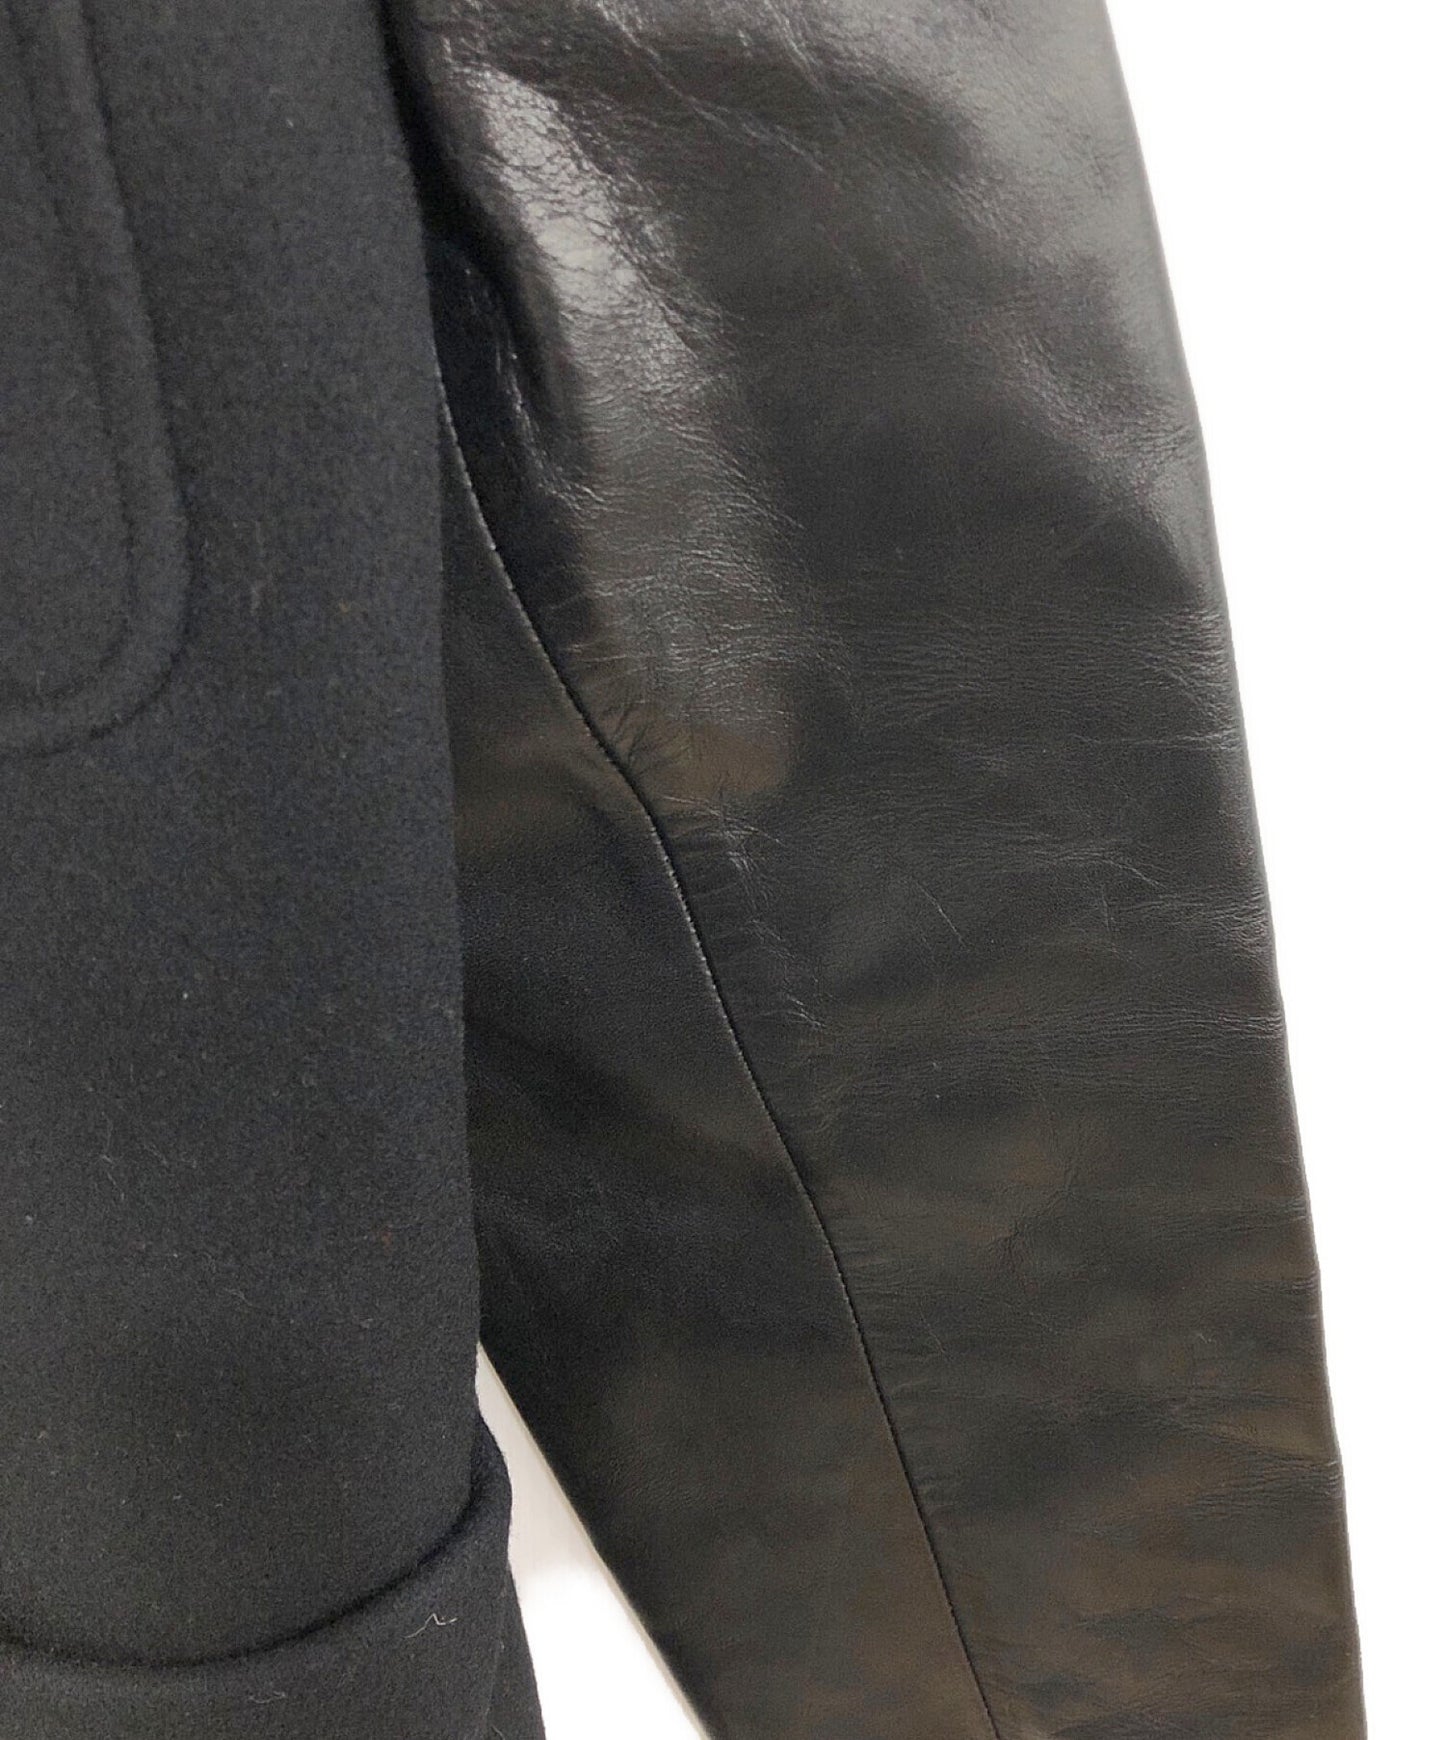 [Pre-owned] COMME des GARCONS HOMME Leather Switching Coat HJ-08035M